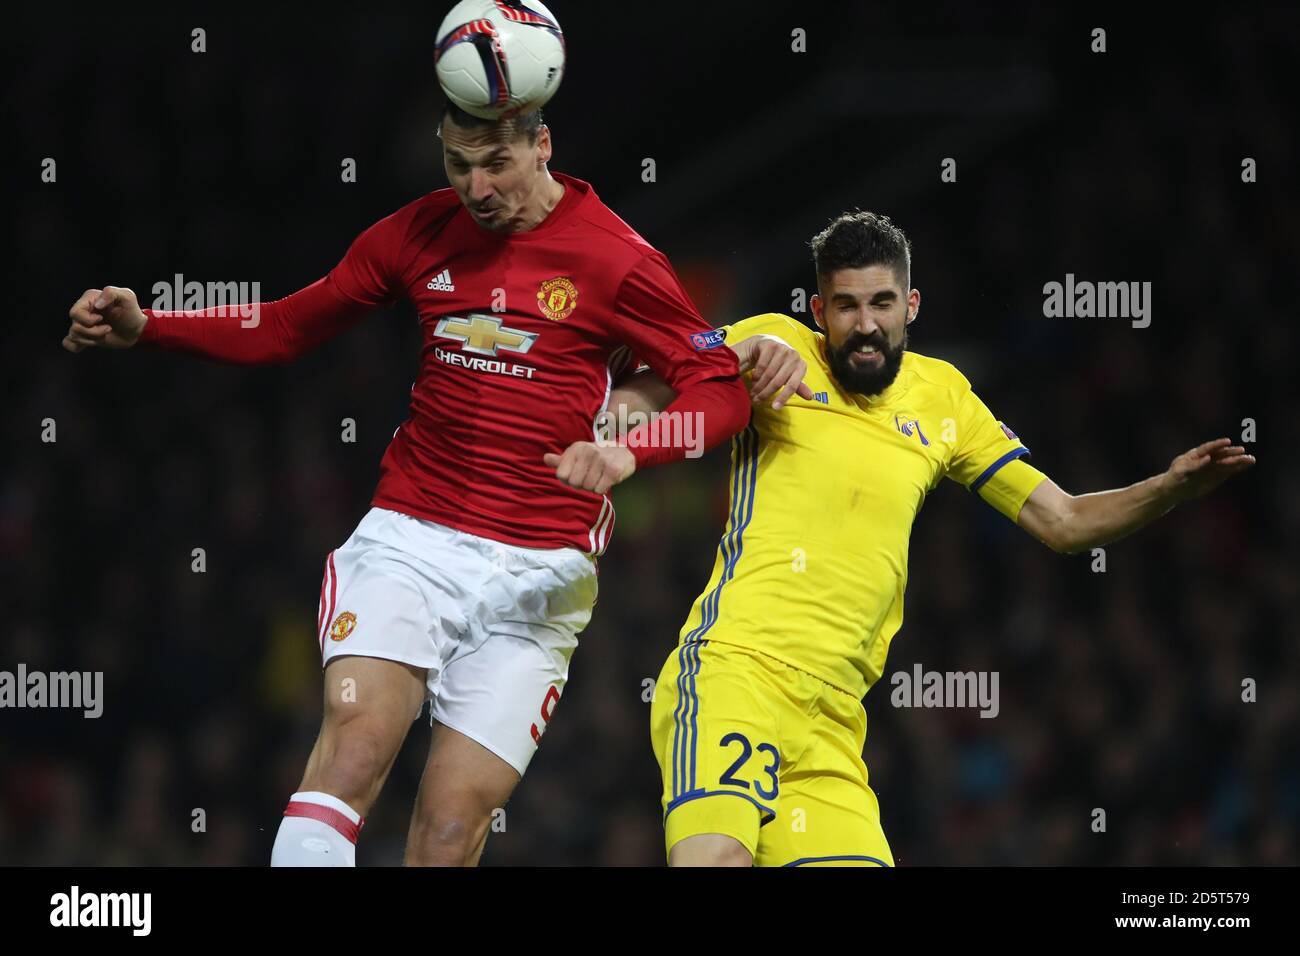 Manchester United's Zlatan Ibrahimovic (left) and FC Rostov's Miha Mevlja battle for the ball in the air  Stock Photo